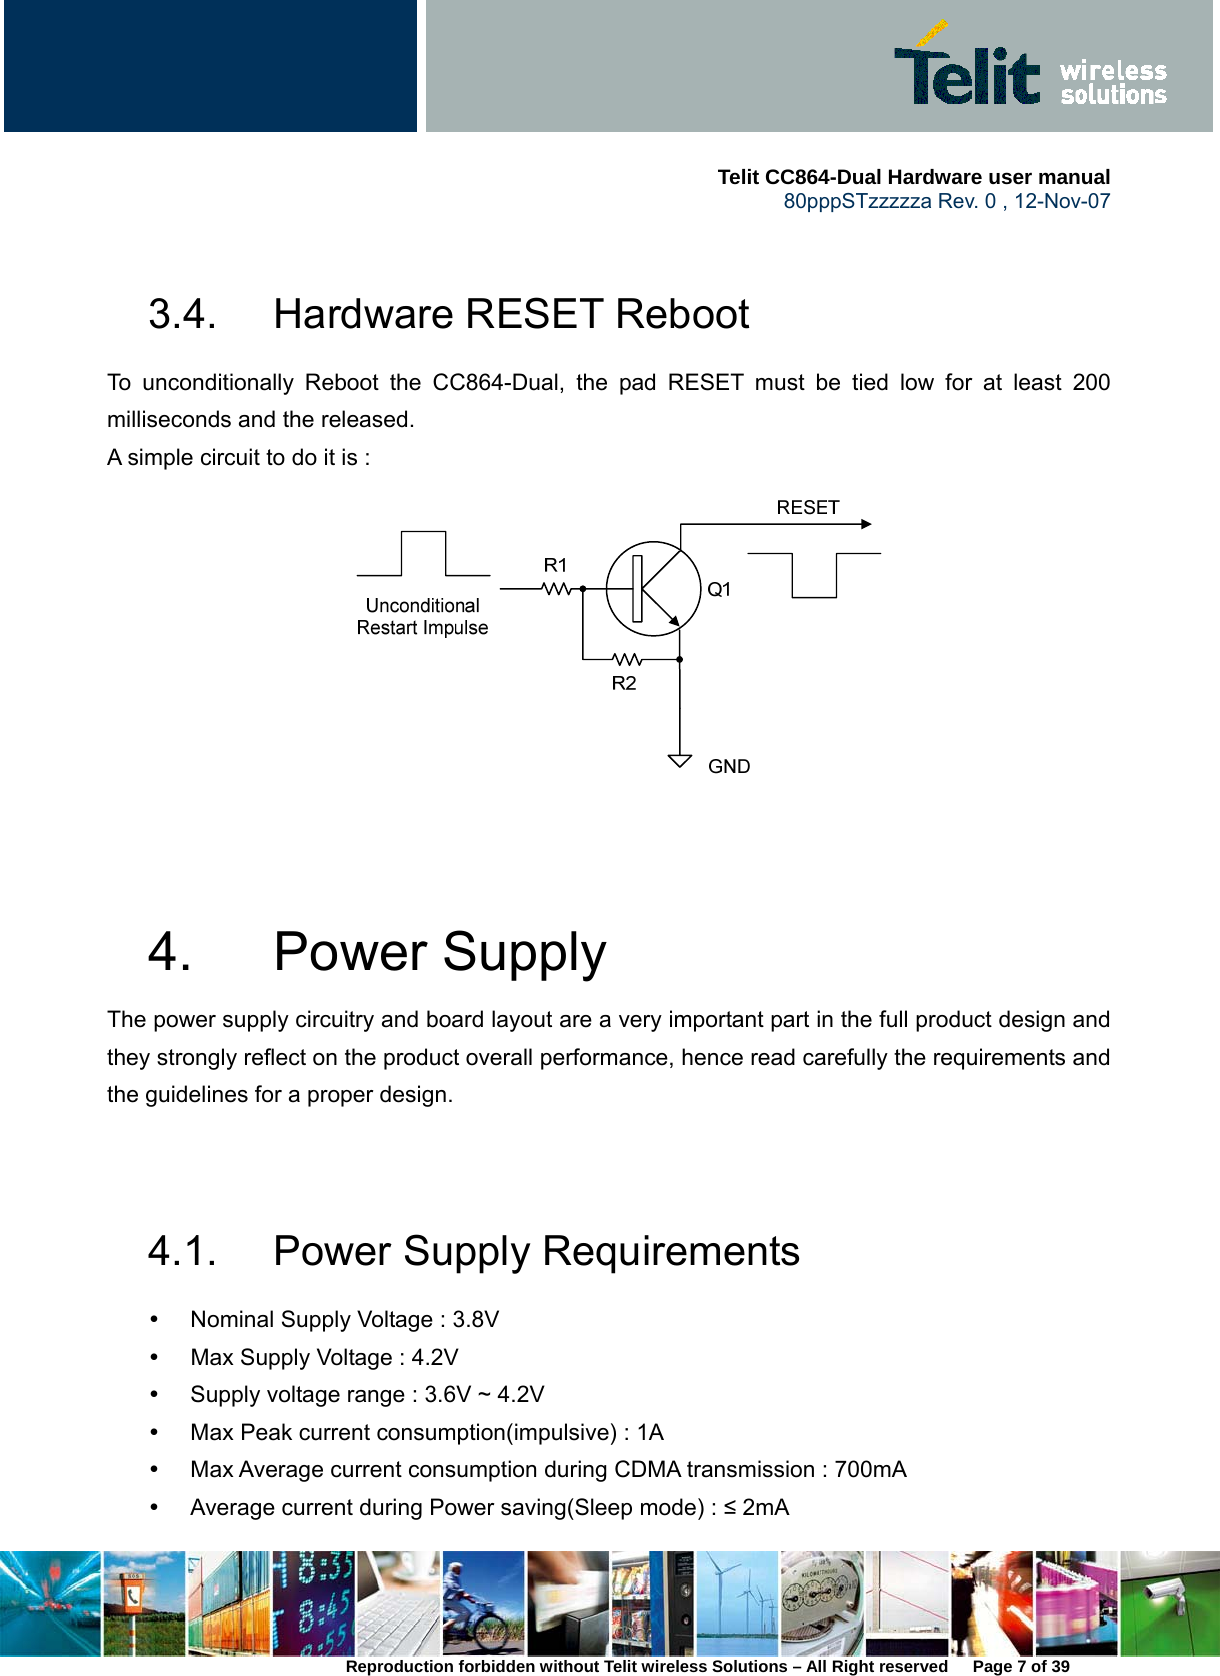     Telit CC864-Dual Hardware user manual   80pppSTzzzzza Rev. 0 , 12-Nov-07 Reproduction forbidden without Telit wireless Solutions – All Right reserved      Page 7 of 39  3.4.  Hardware RESET Reboot To unconditionally Reboot the CC864-Dual, the pad RESET must be tied low for at least 200 milliseconds and the released. A simple circuit to do it is :      4. Power Supply The power supply circuitry and board layout are a very important part in the full product design and they strongly reflect on the product overall performance, hence read carefully the requirements and the guidelines for a proper design.   4.1.  Power Supply Requirements y  Nominal Supply Voltage : 3.8V y  Max Supply Voltage : 4.2V y  Supply voltage range : 3.6V ~ 4.2V y  Max Peak current consumption(impulsive) : 1A y  Max Average current consumption during CDMA transmission : 700mA y  Average current during Power saving(Sleep mode) : ≤ 2mA 